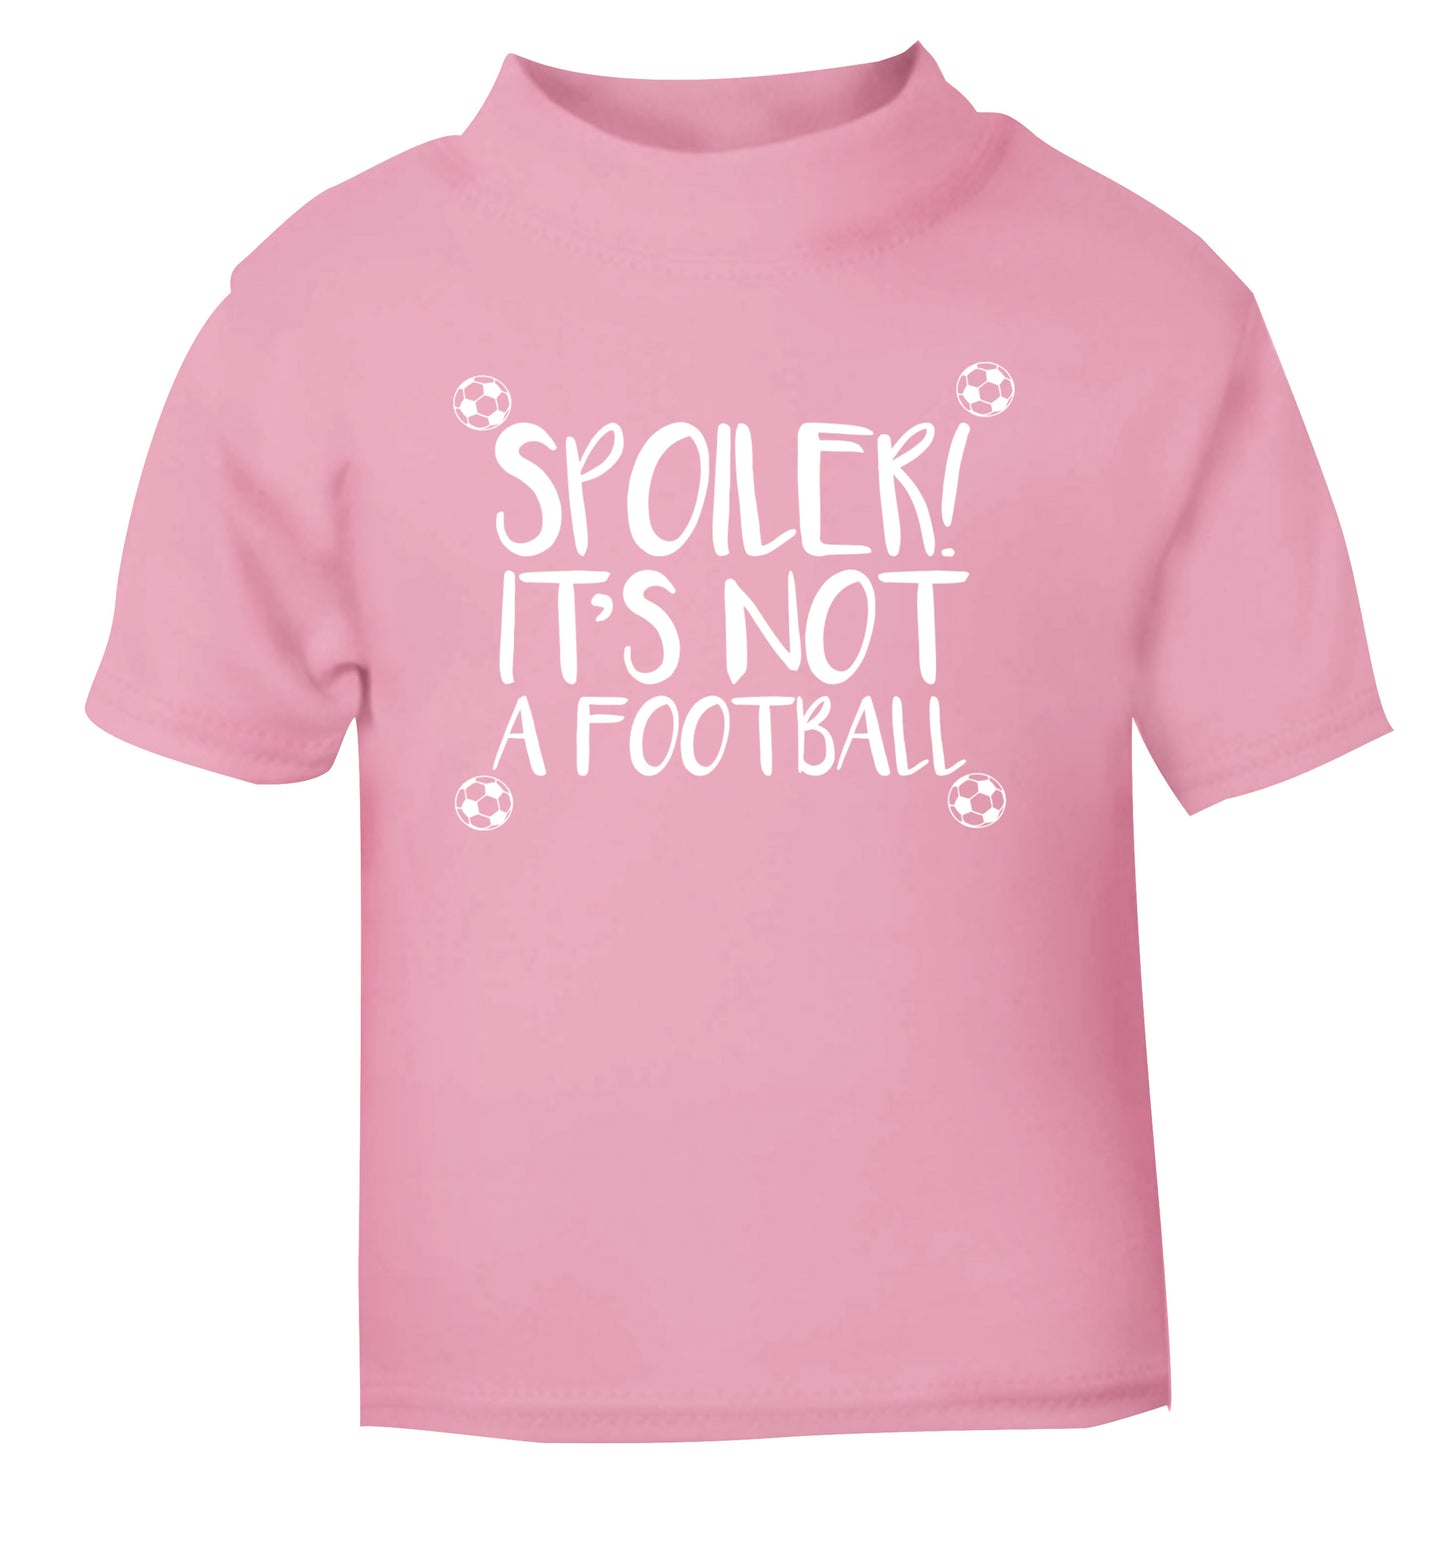 Spoiler it's not a football light pink Baby Toddler Tshirt 2 Years